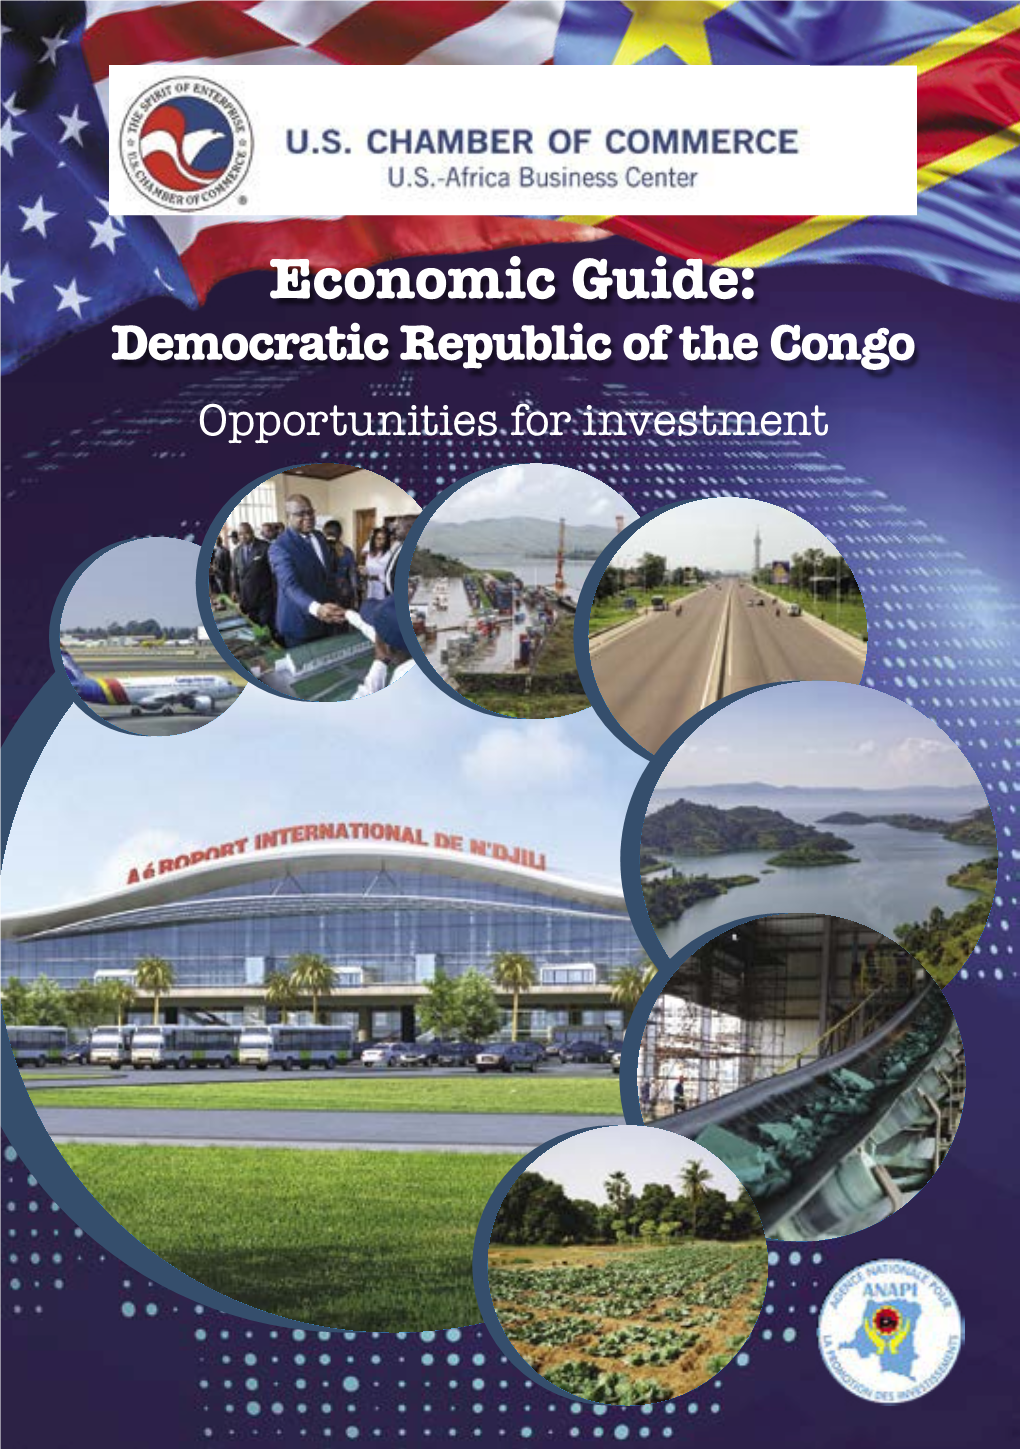 Economic Guide: Democratic Republic of the Congo Opportunities for Investment